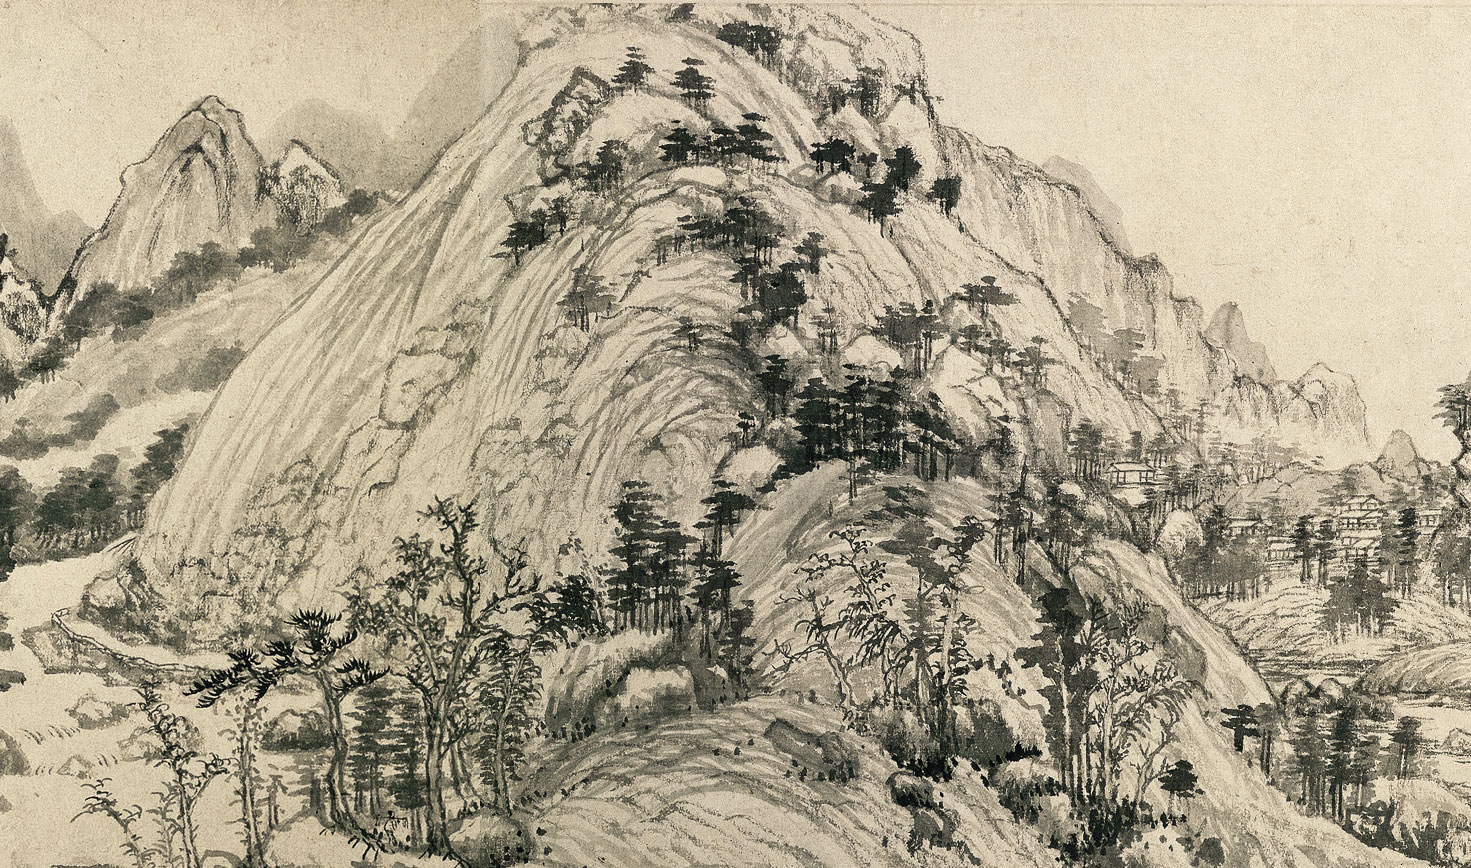 “The Master Wuyong Scroll,” Huang Gongwang, Dwelling in the Fuchun Mountains, 1350, handscroll, ink on paper, 33 x 636.9 cm (National Palace Museum, Taipei)